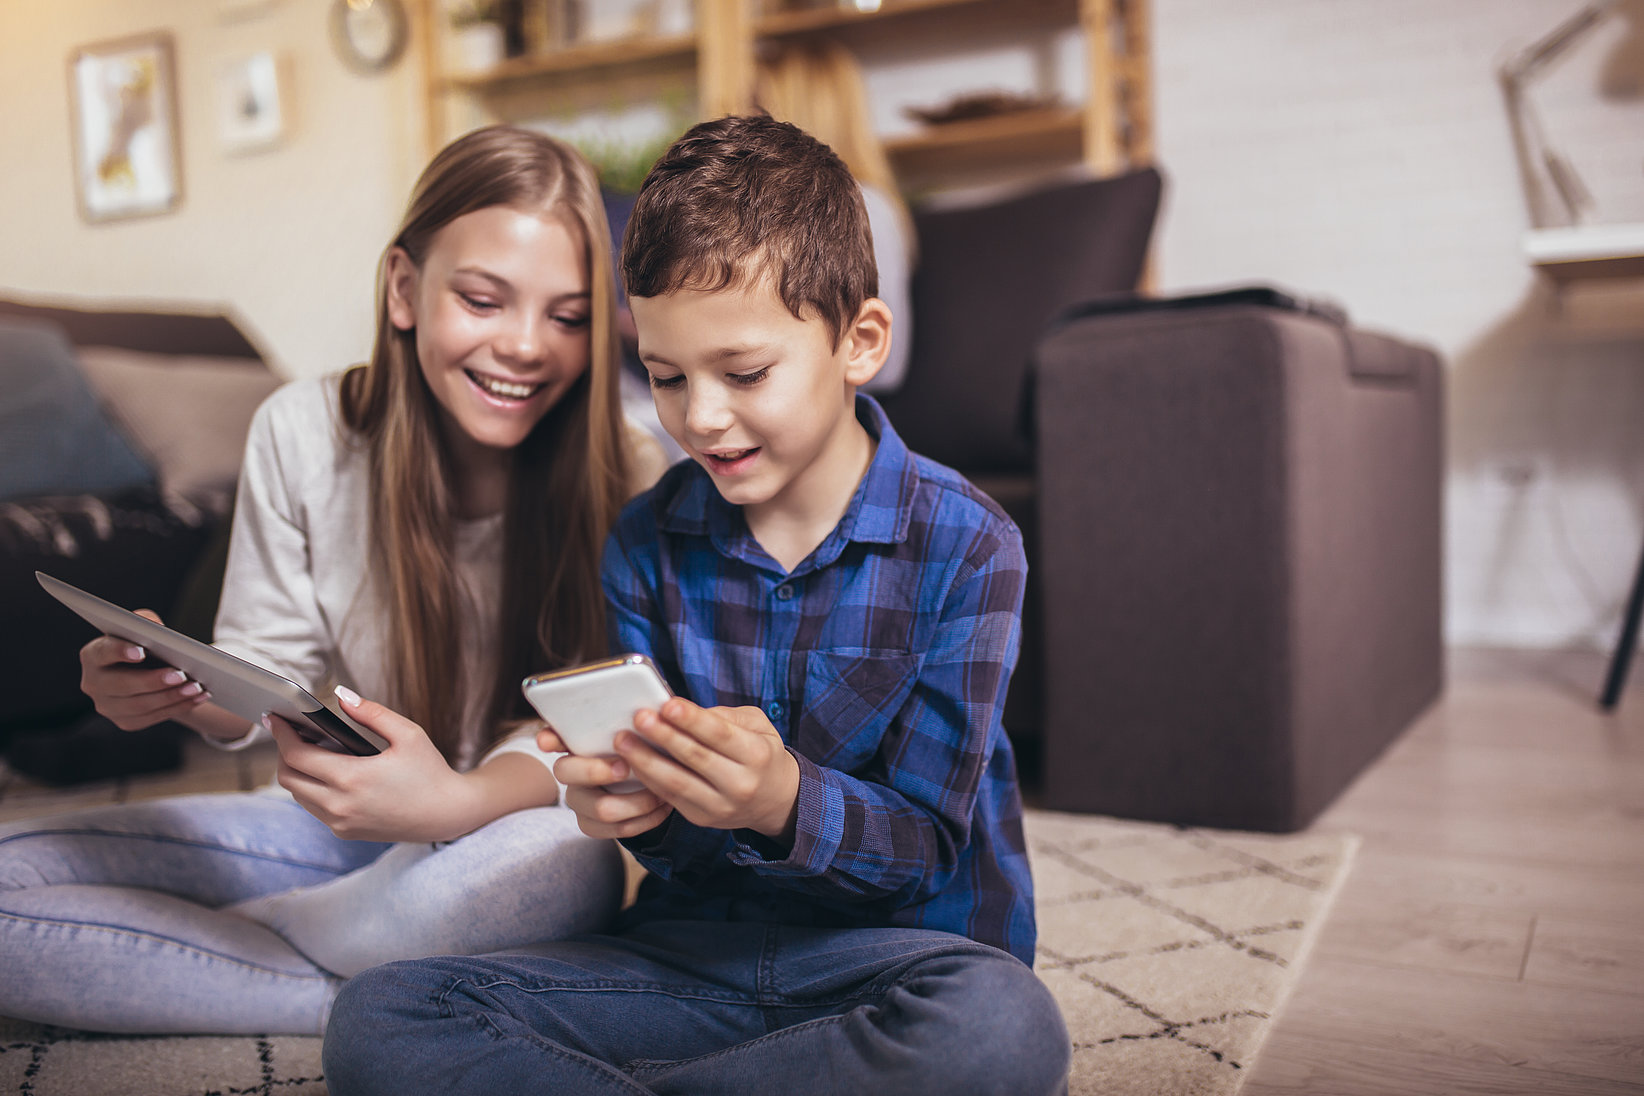 A boy with a mobile phone and a girl with a tablet are sitting on the floor in the living room, smiling and showing each other something on it.